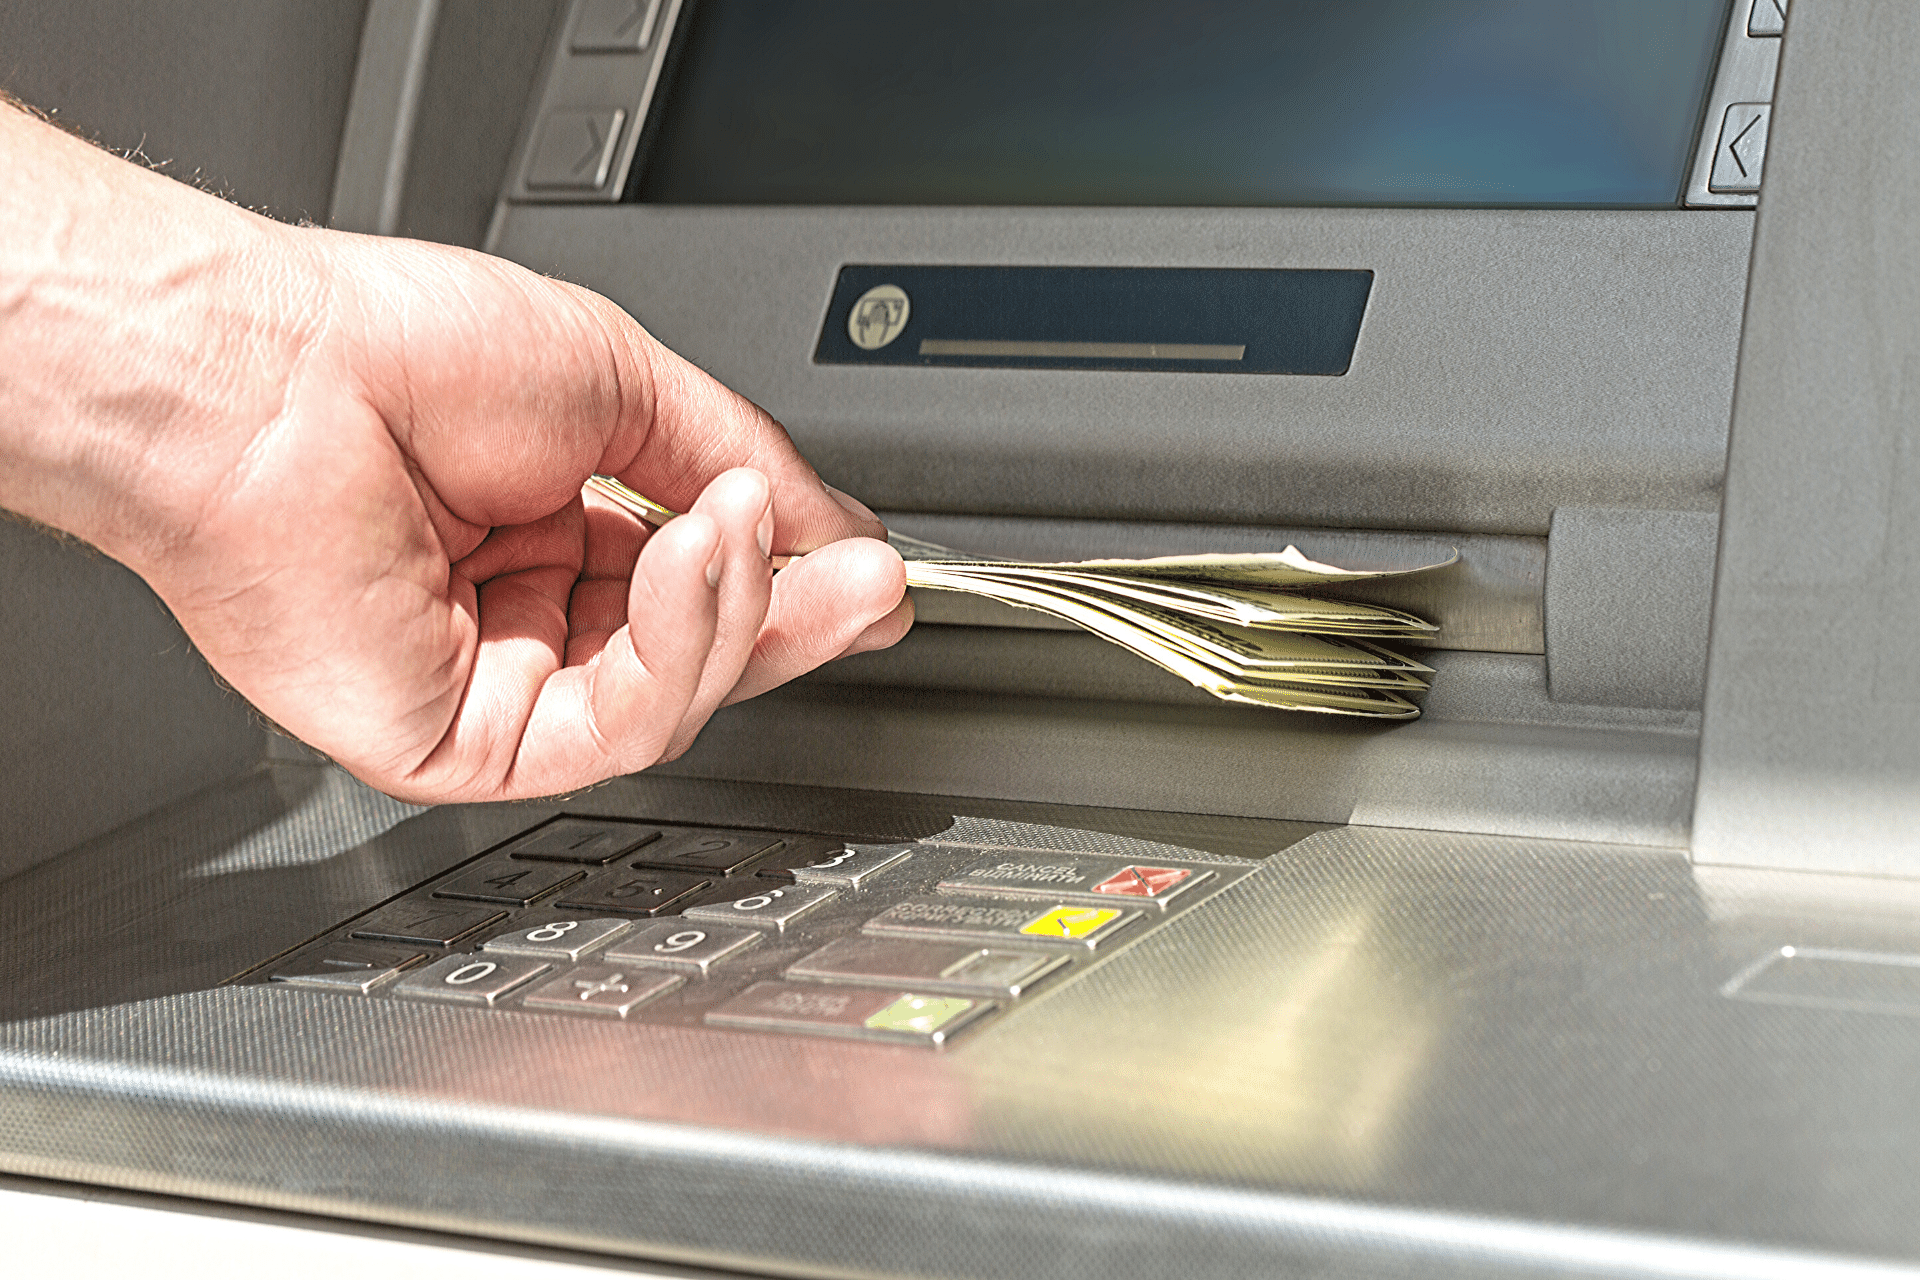 A hand pulling out money from an atm machine